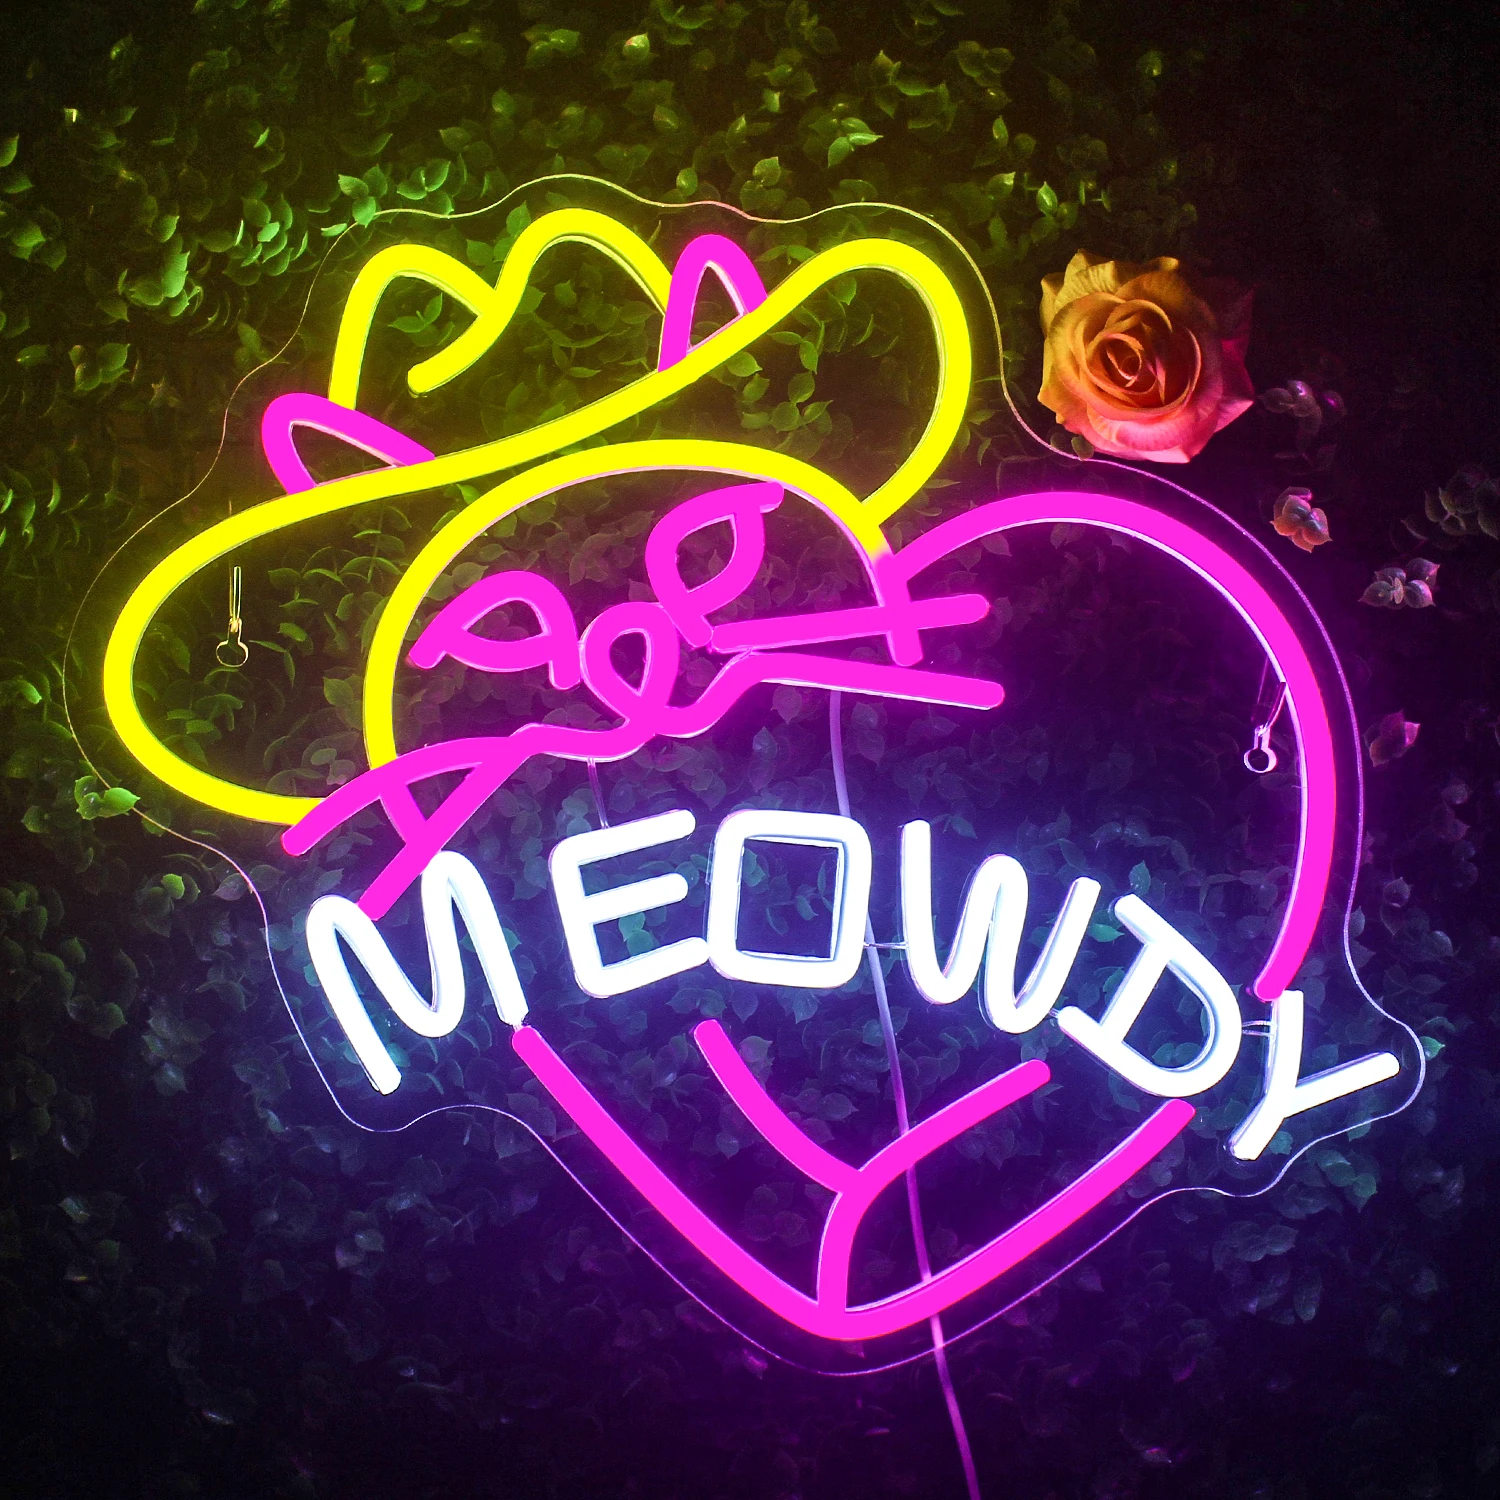 

Pink Meow Neon Sigh LED Light Creative Love Shaped Cat With Cowboy Hat Party Home Room Decor USB Powered Dimmable Panel lights